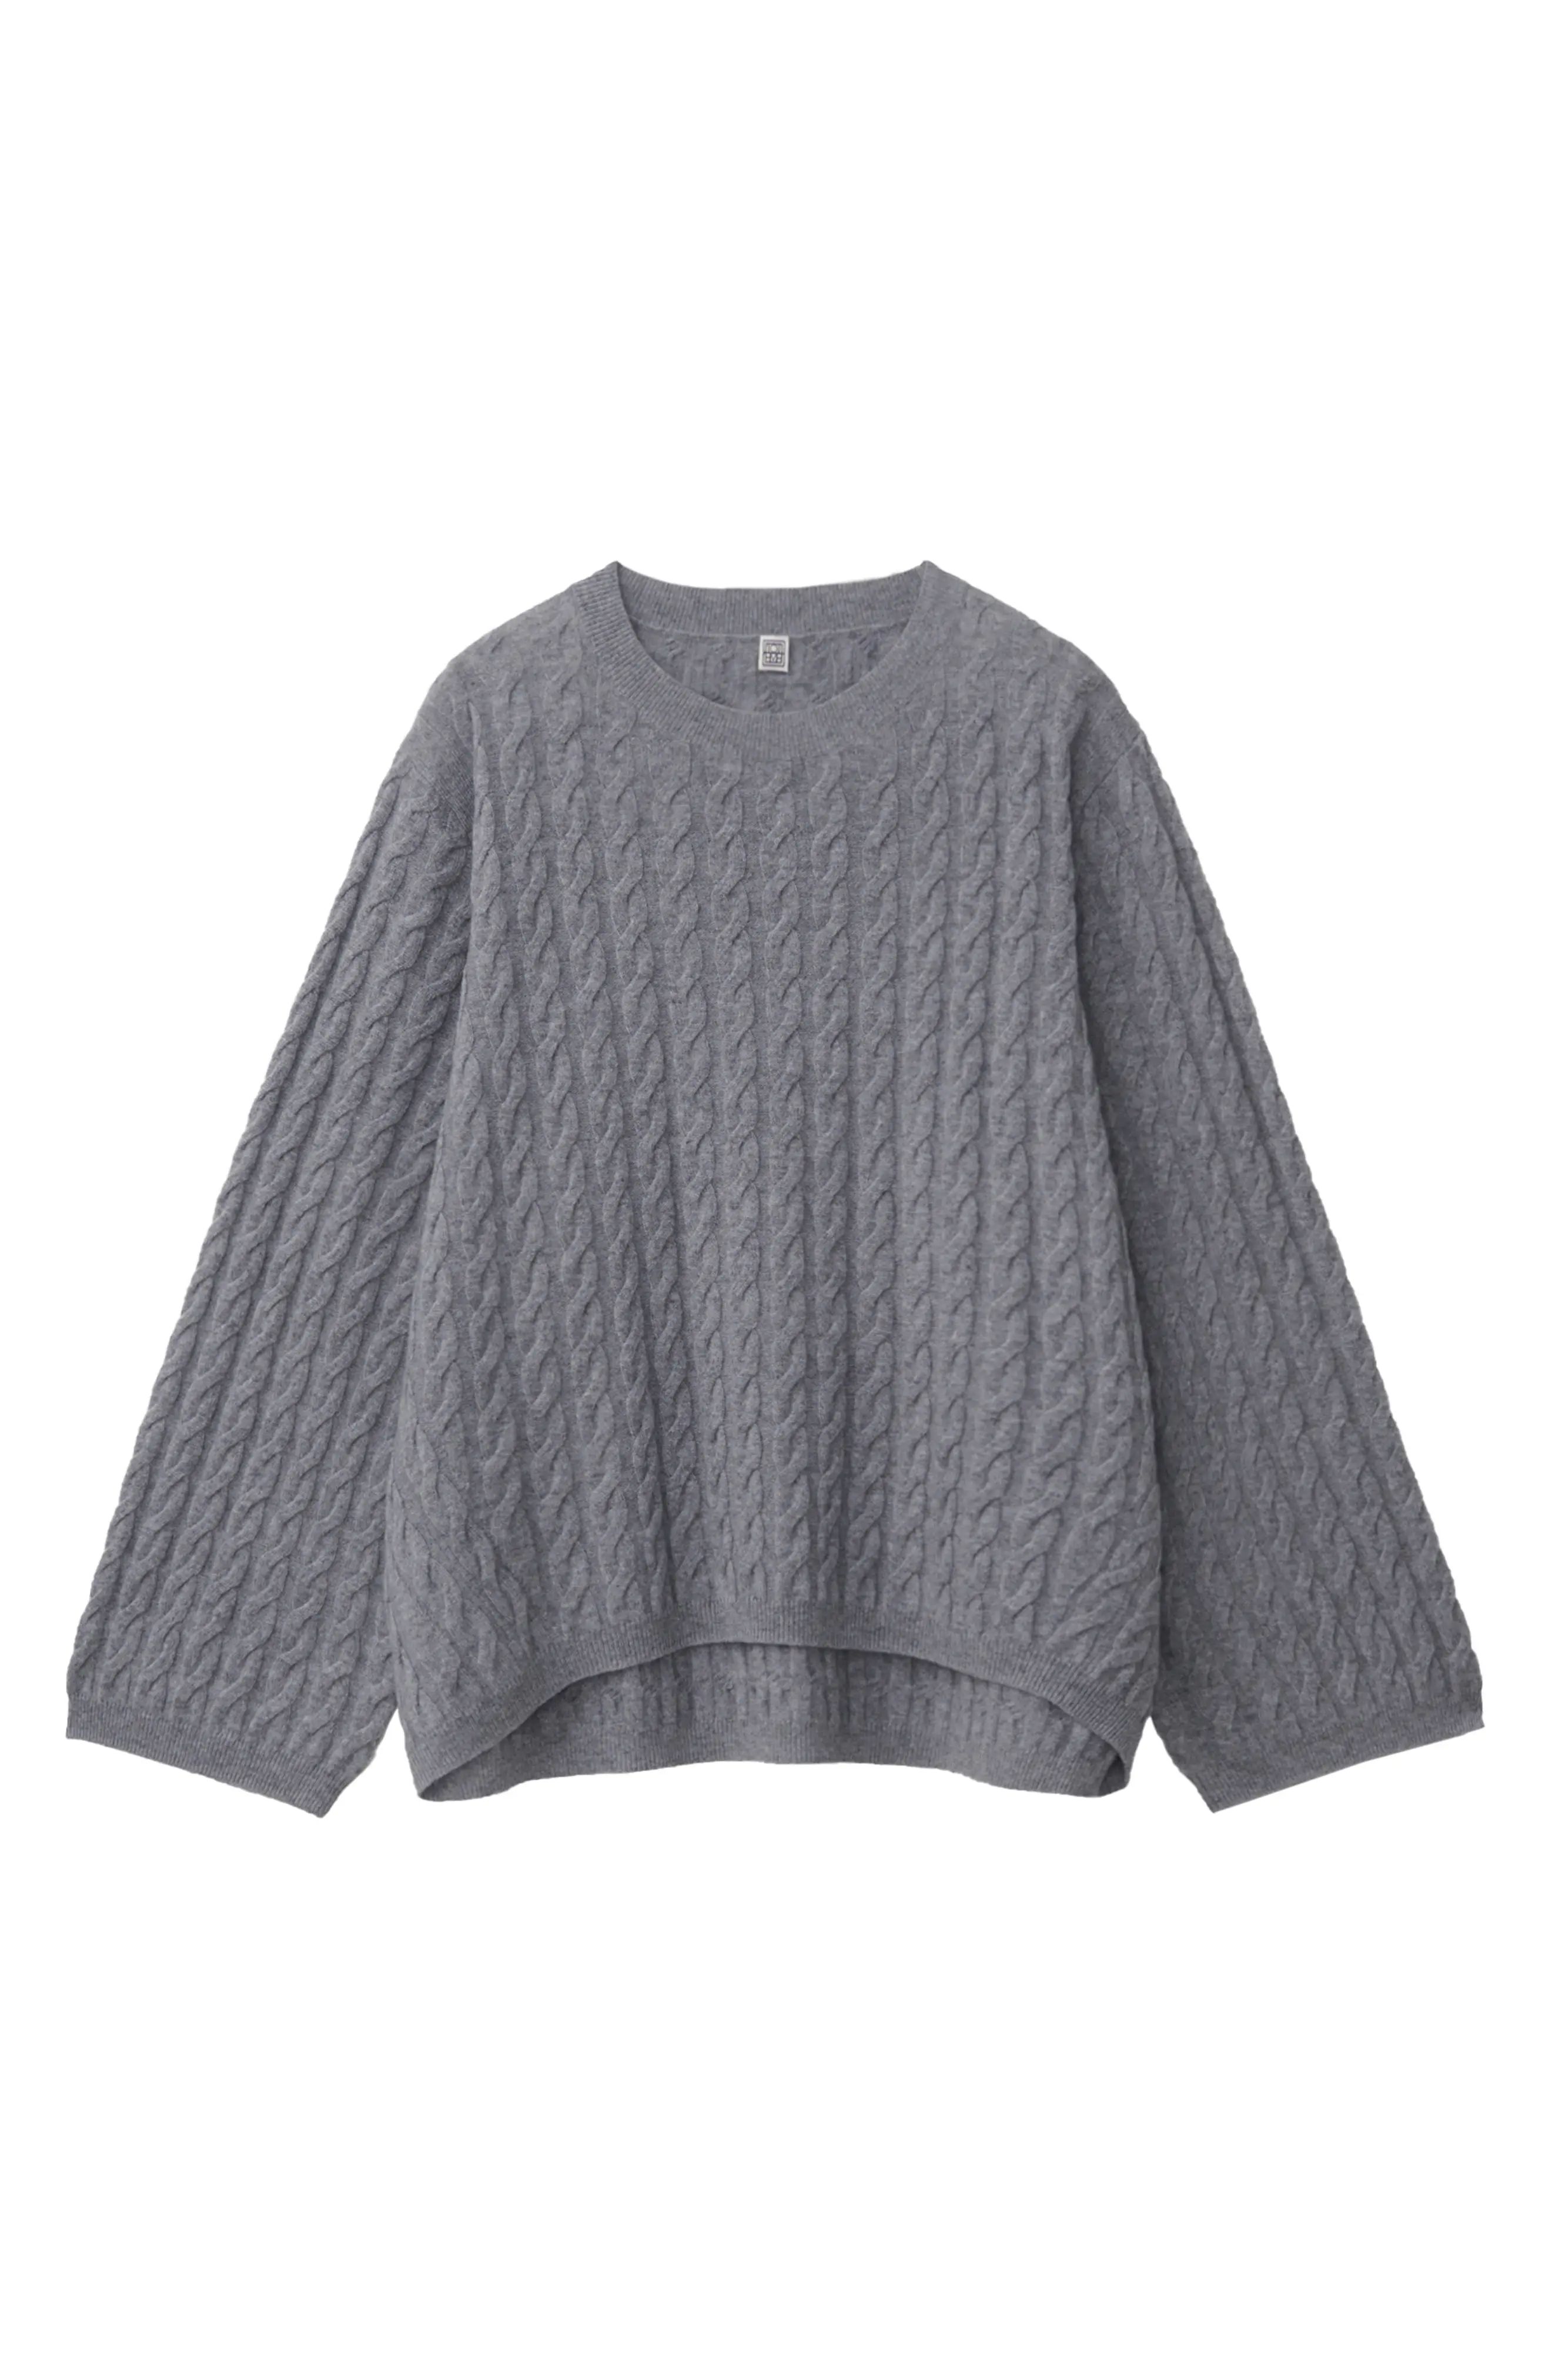 Toteme Women's Cable Stitch Cashmere Sweater in Grey Melange at Nordstrom, Size Medium | Nordstrom